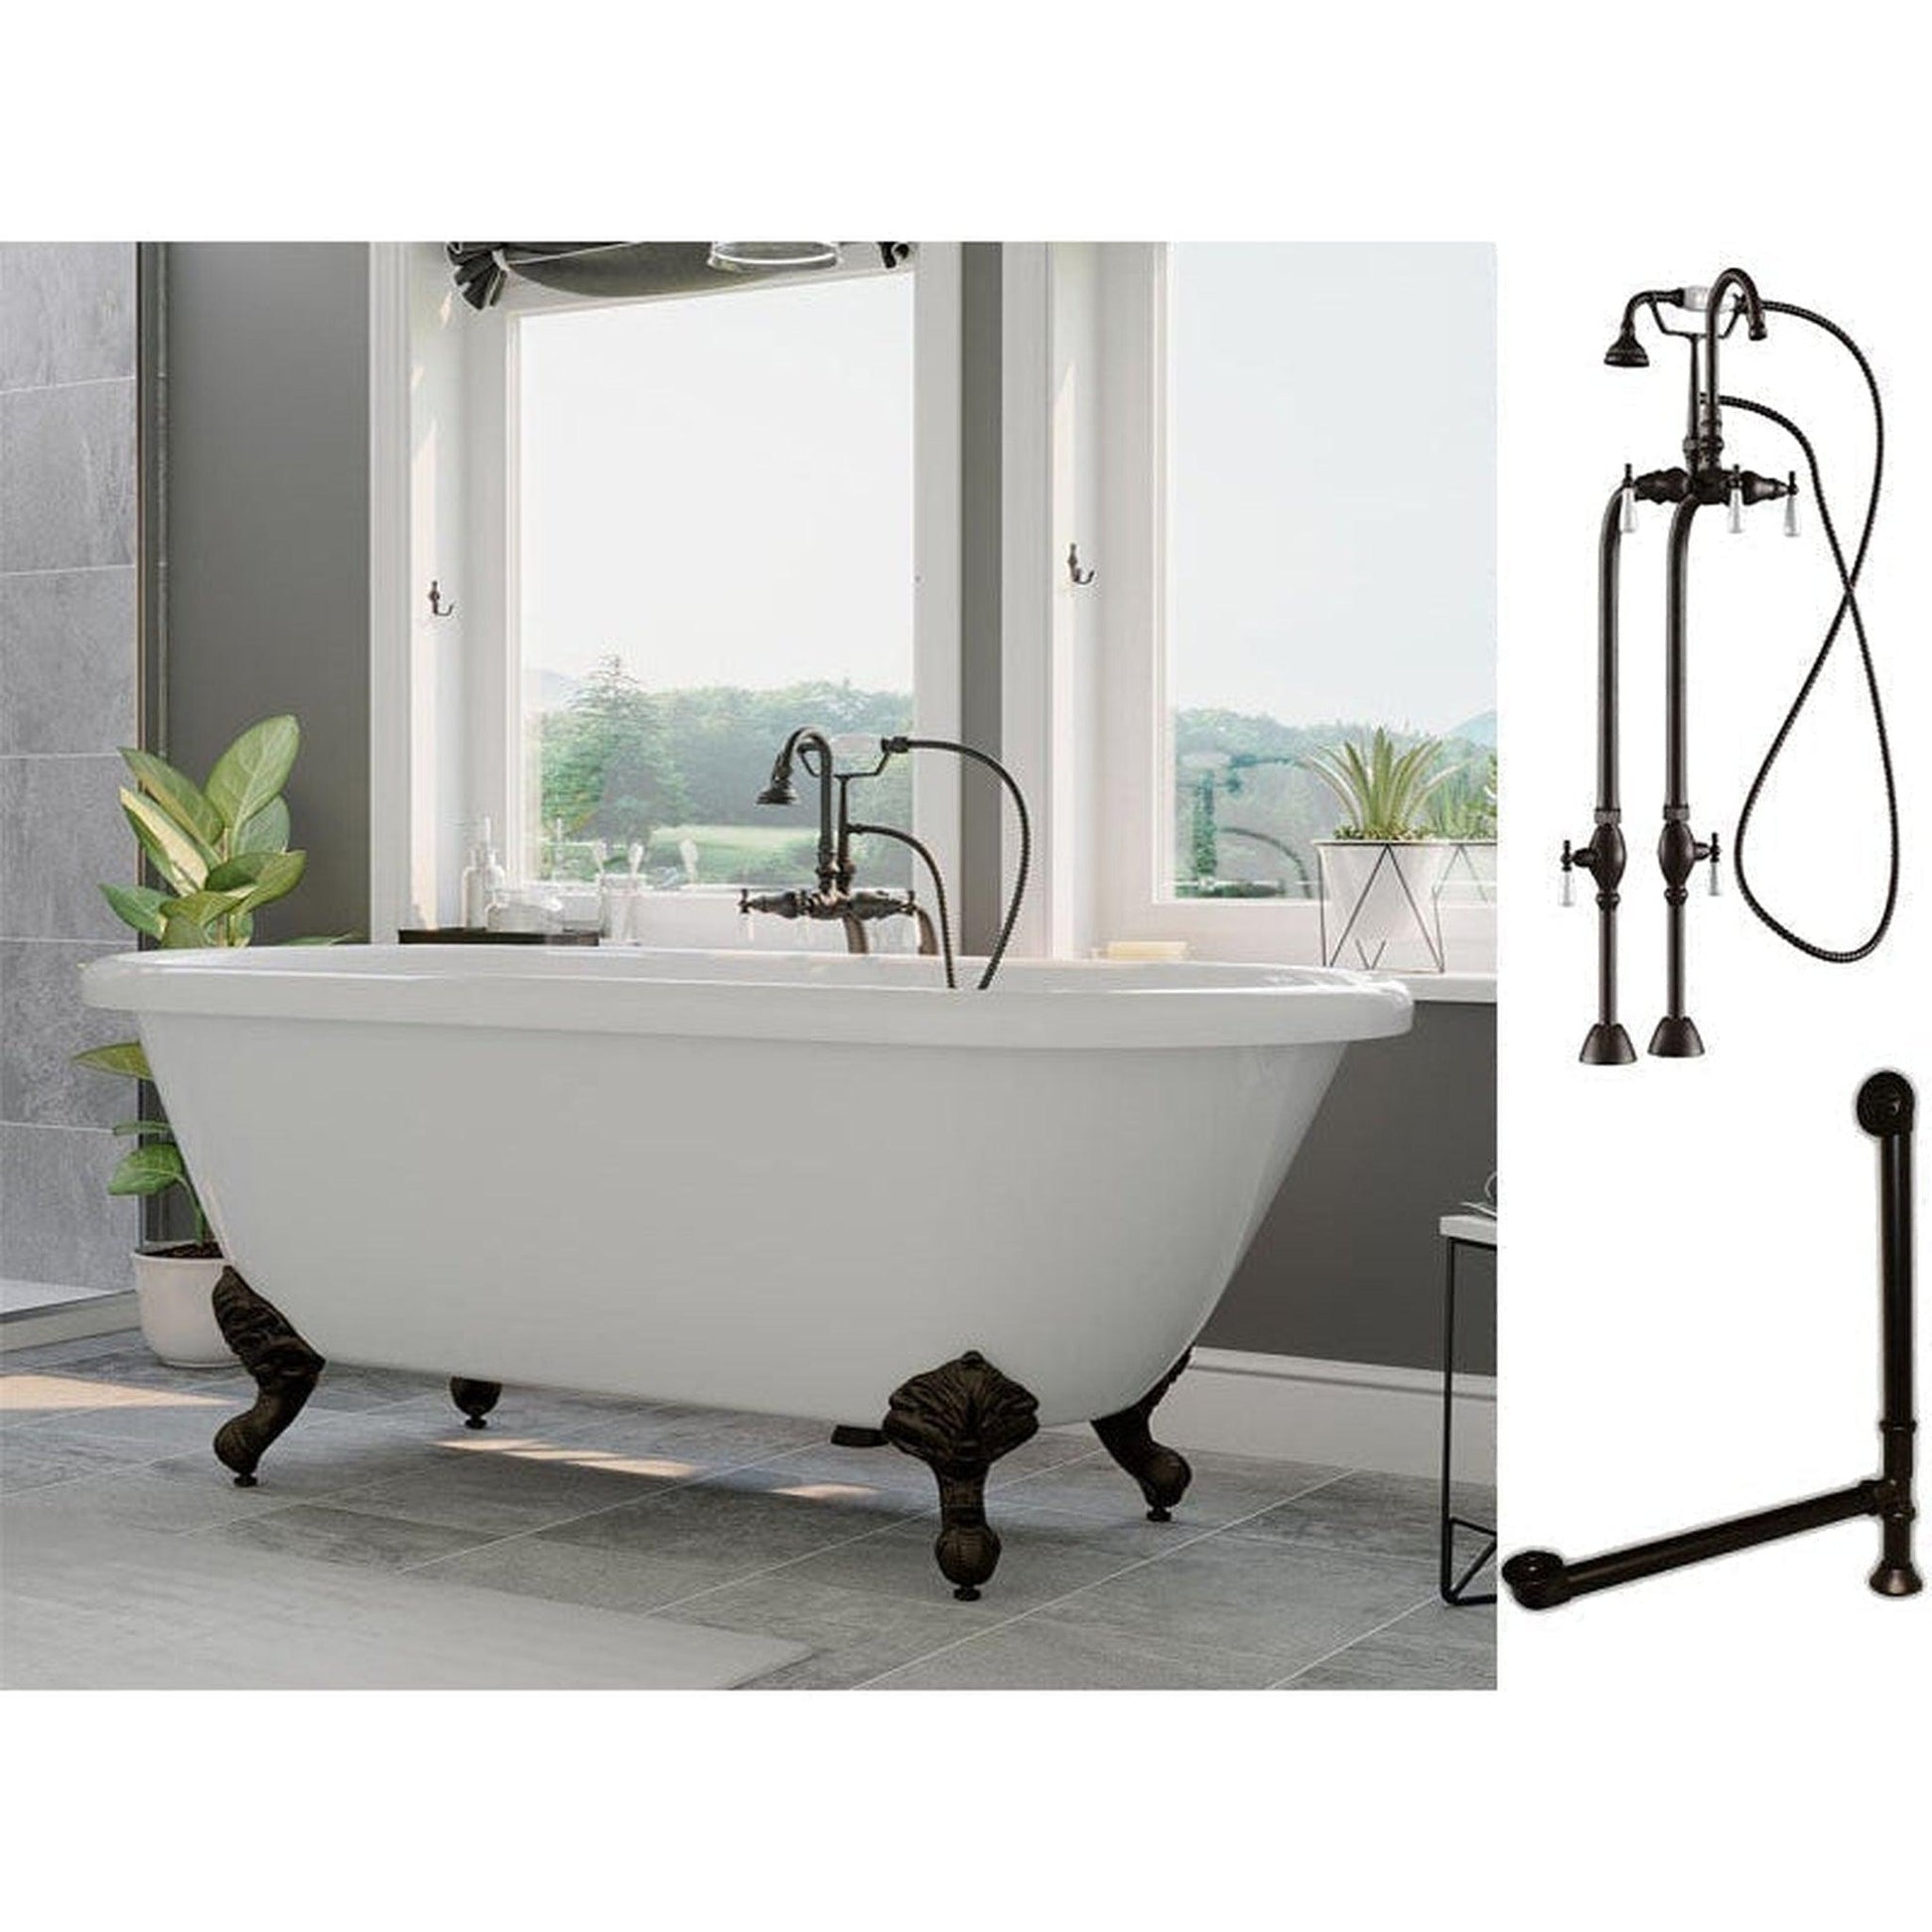 Cambridge Plumbing 60" White Acrylic Double Ended Clawfoot Bathtub With No Deck Holes And Complete Plumbing Package Including Freestanding English Telephone Gooseneck Faucet, Drain And Overflow Assembly In Oil Rubbed Bronze